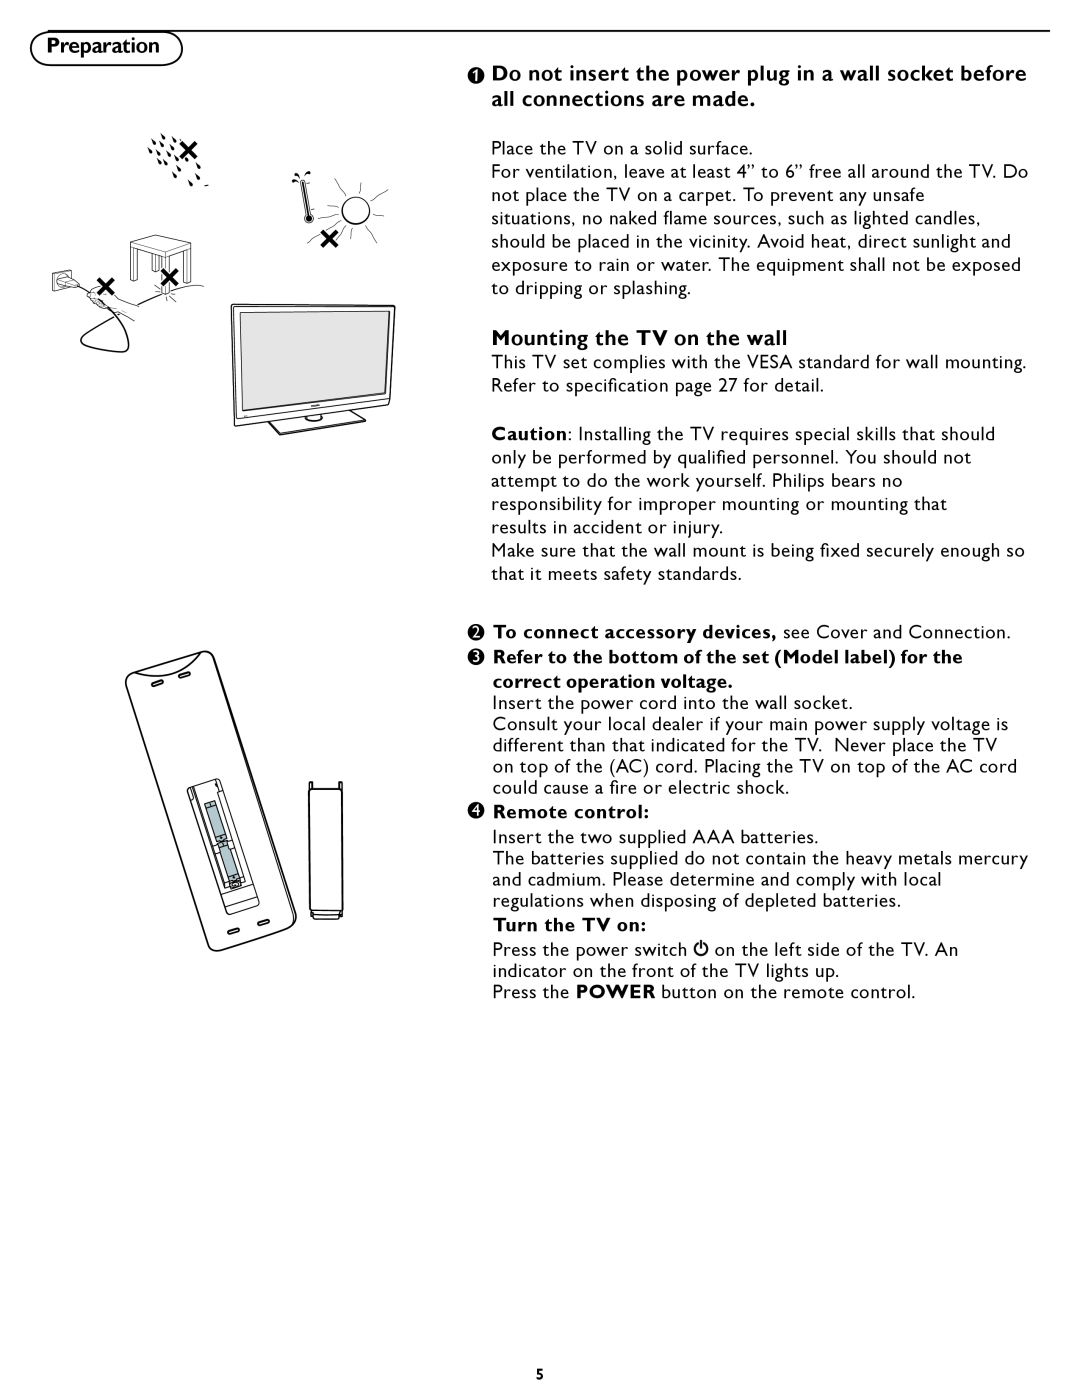 Philips 42PFL7422 To connect accessory devices, see Cover and Connection, correct operation voltage, Remote control 